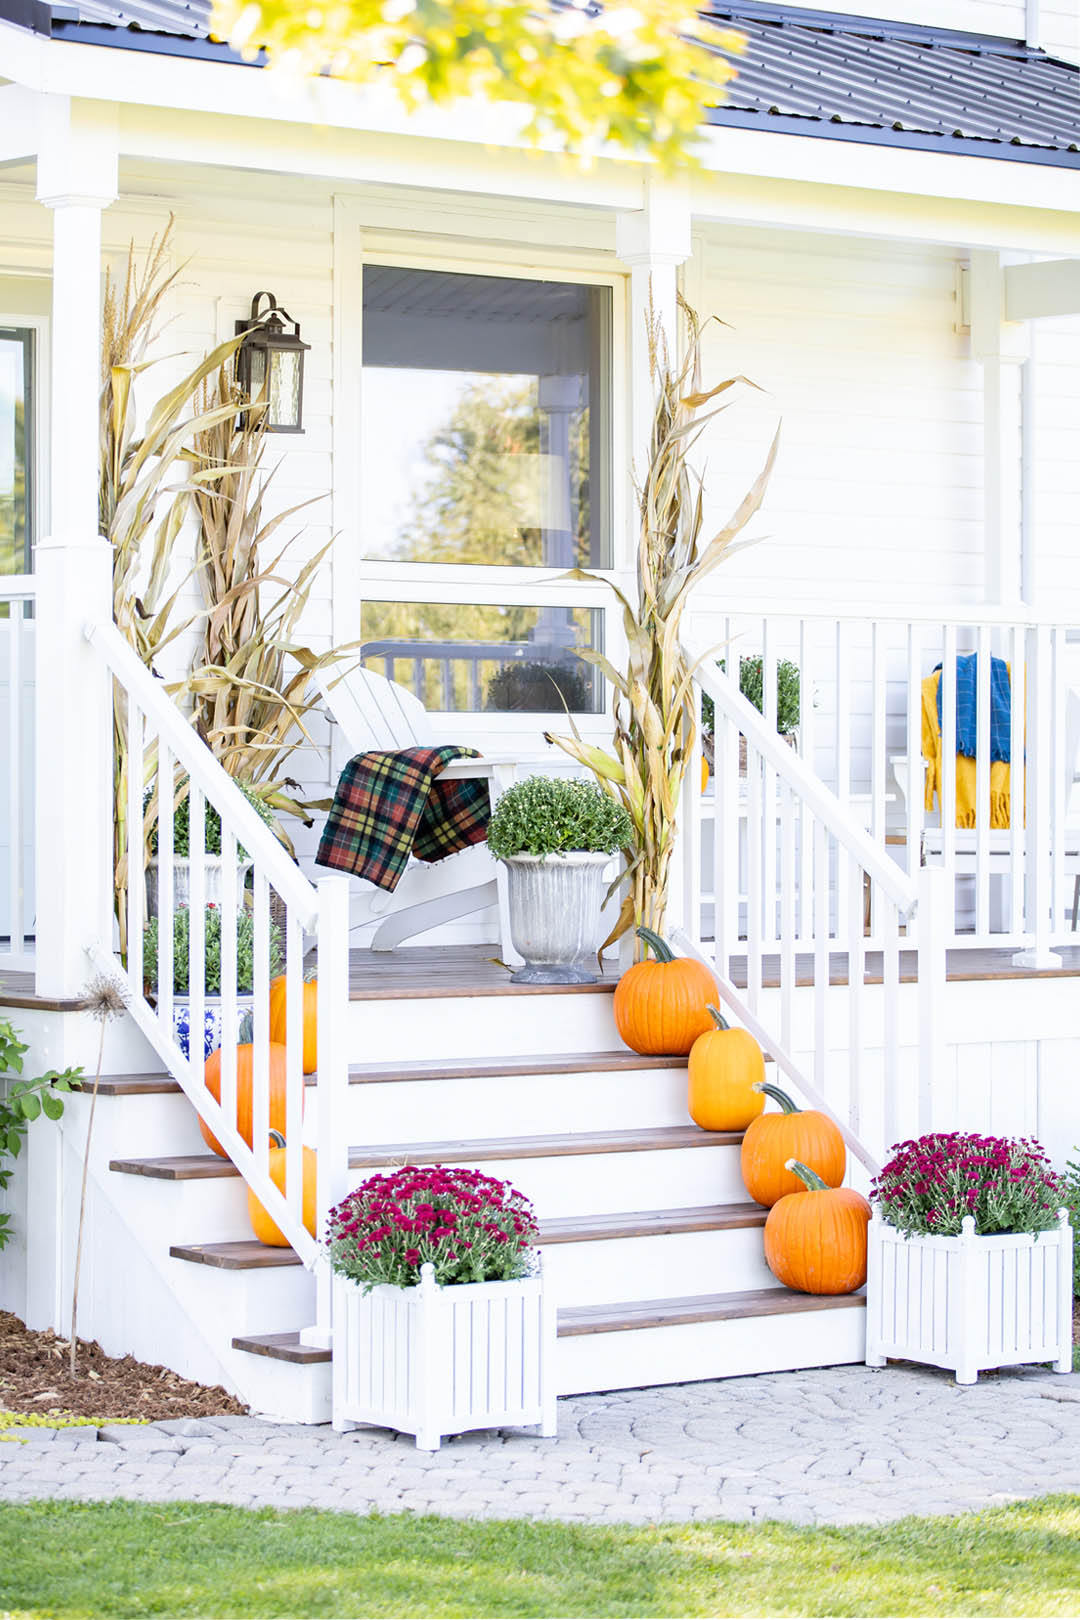 Fall weather is here! In today's post we'll share how we've decorated our classic farmhouse fall front porch this year with brightly coloured mums and cheerful orange pumpkins.